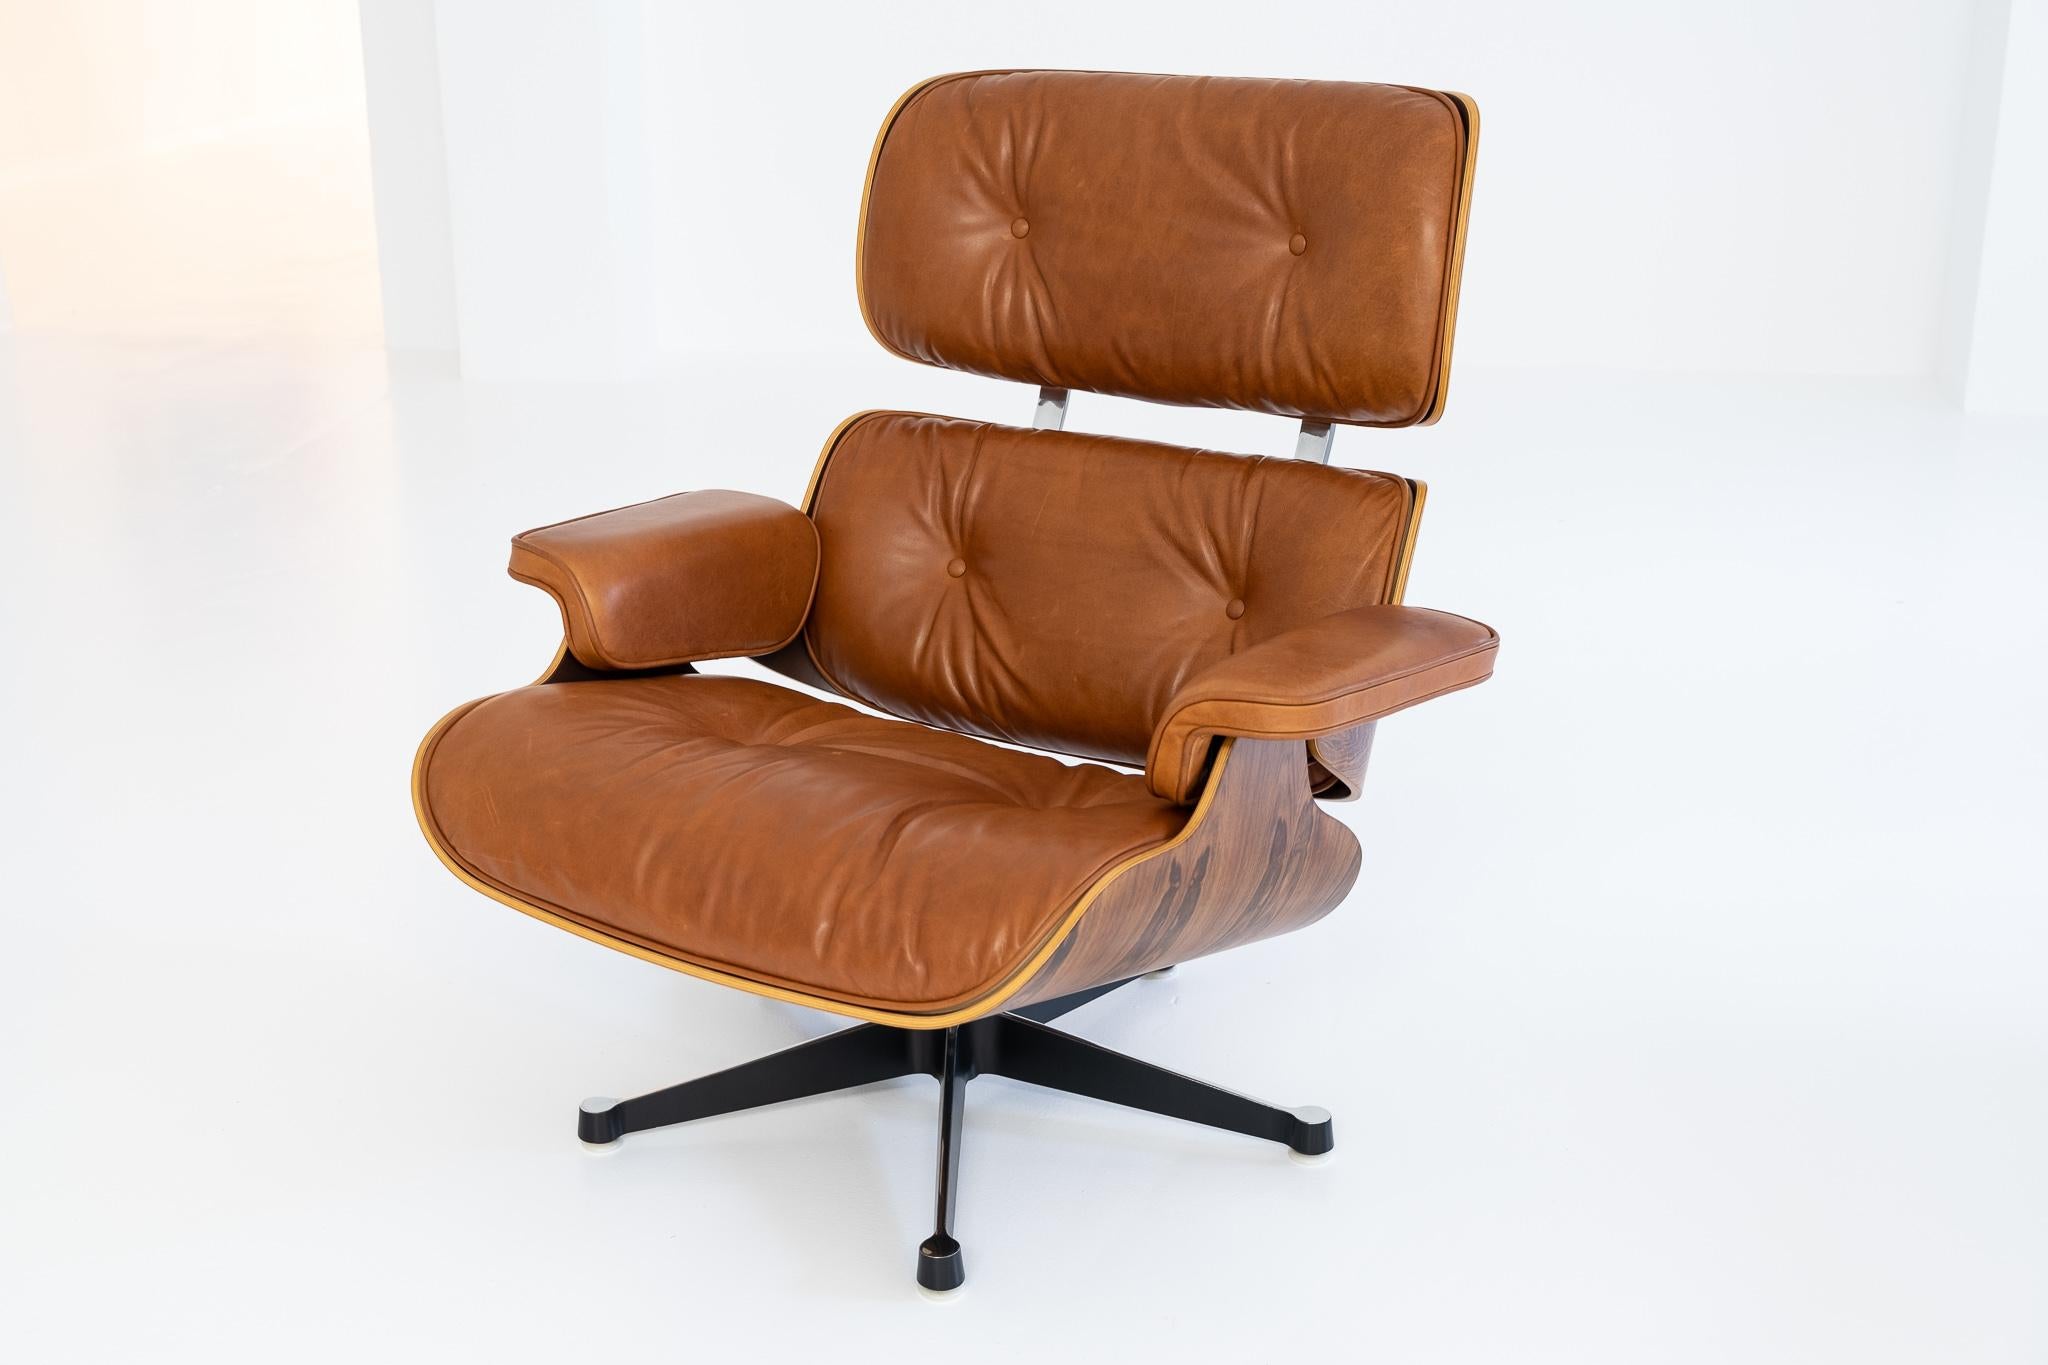 Steel Brazilian Rosewood Lounge Chair by Ray and Charles Eames for Herman Miller, 1965